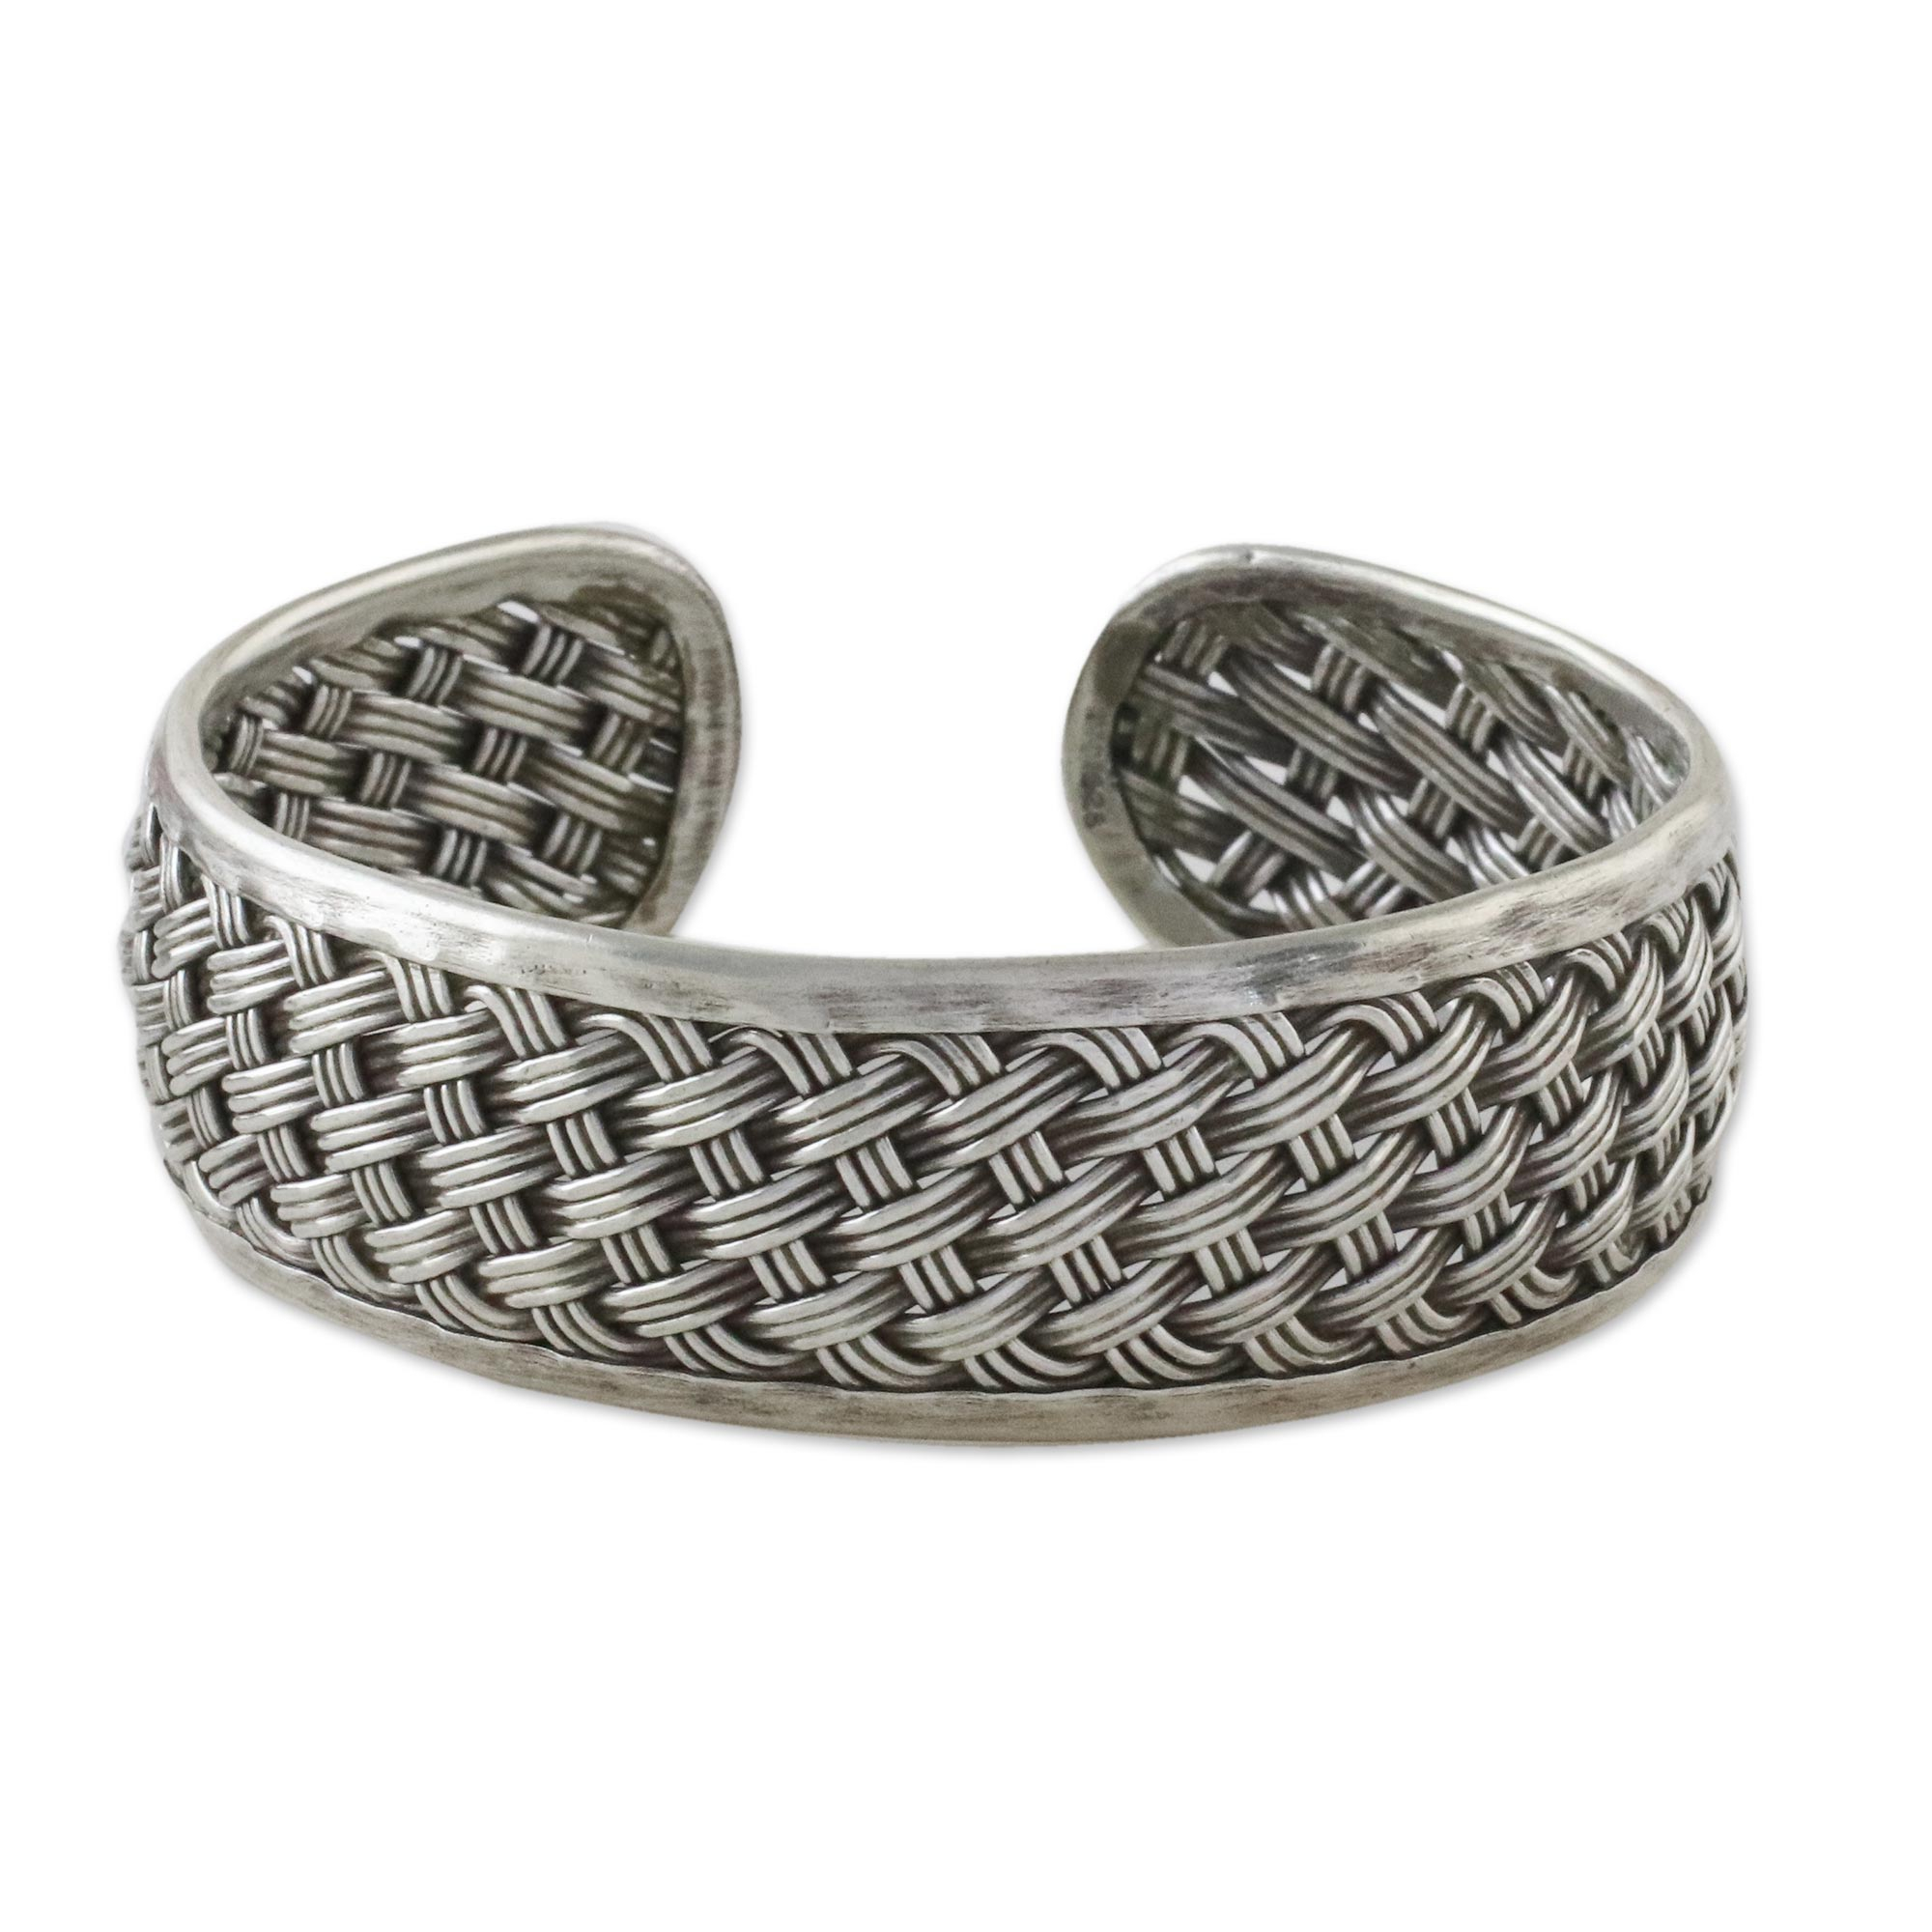 Handcrafted Sterling Silver Cuff Bracelet from Thailand - Tight Weave ...